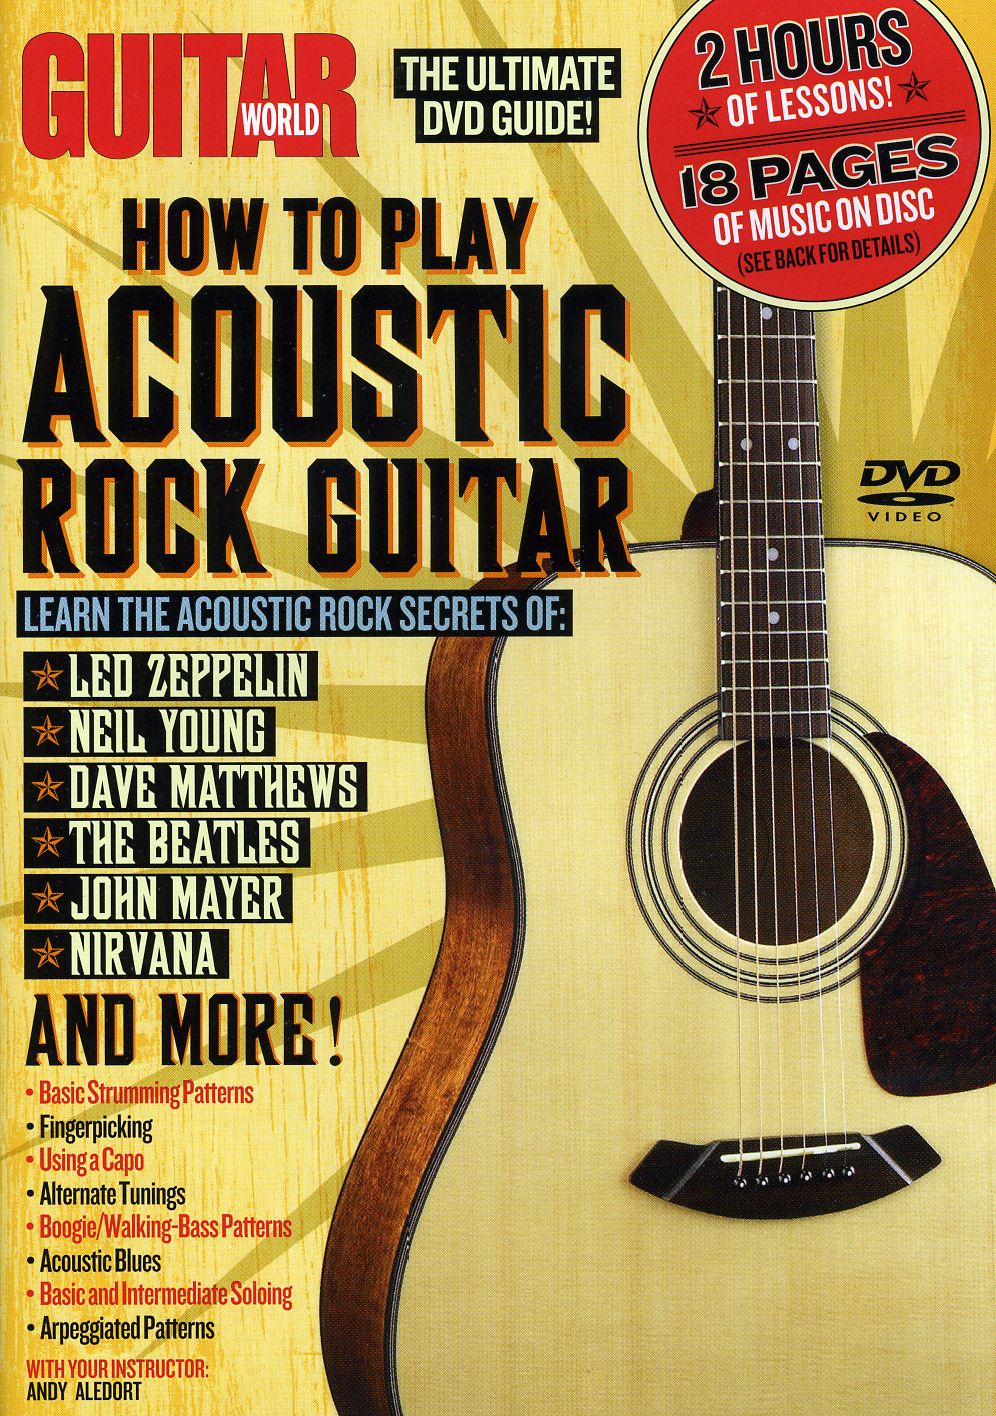 HOW TO PLAY ACOUSTIC ROCK GUITAR